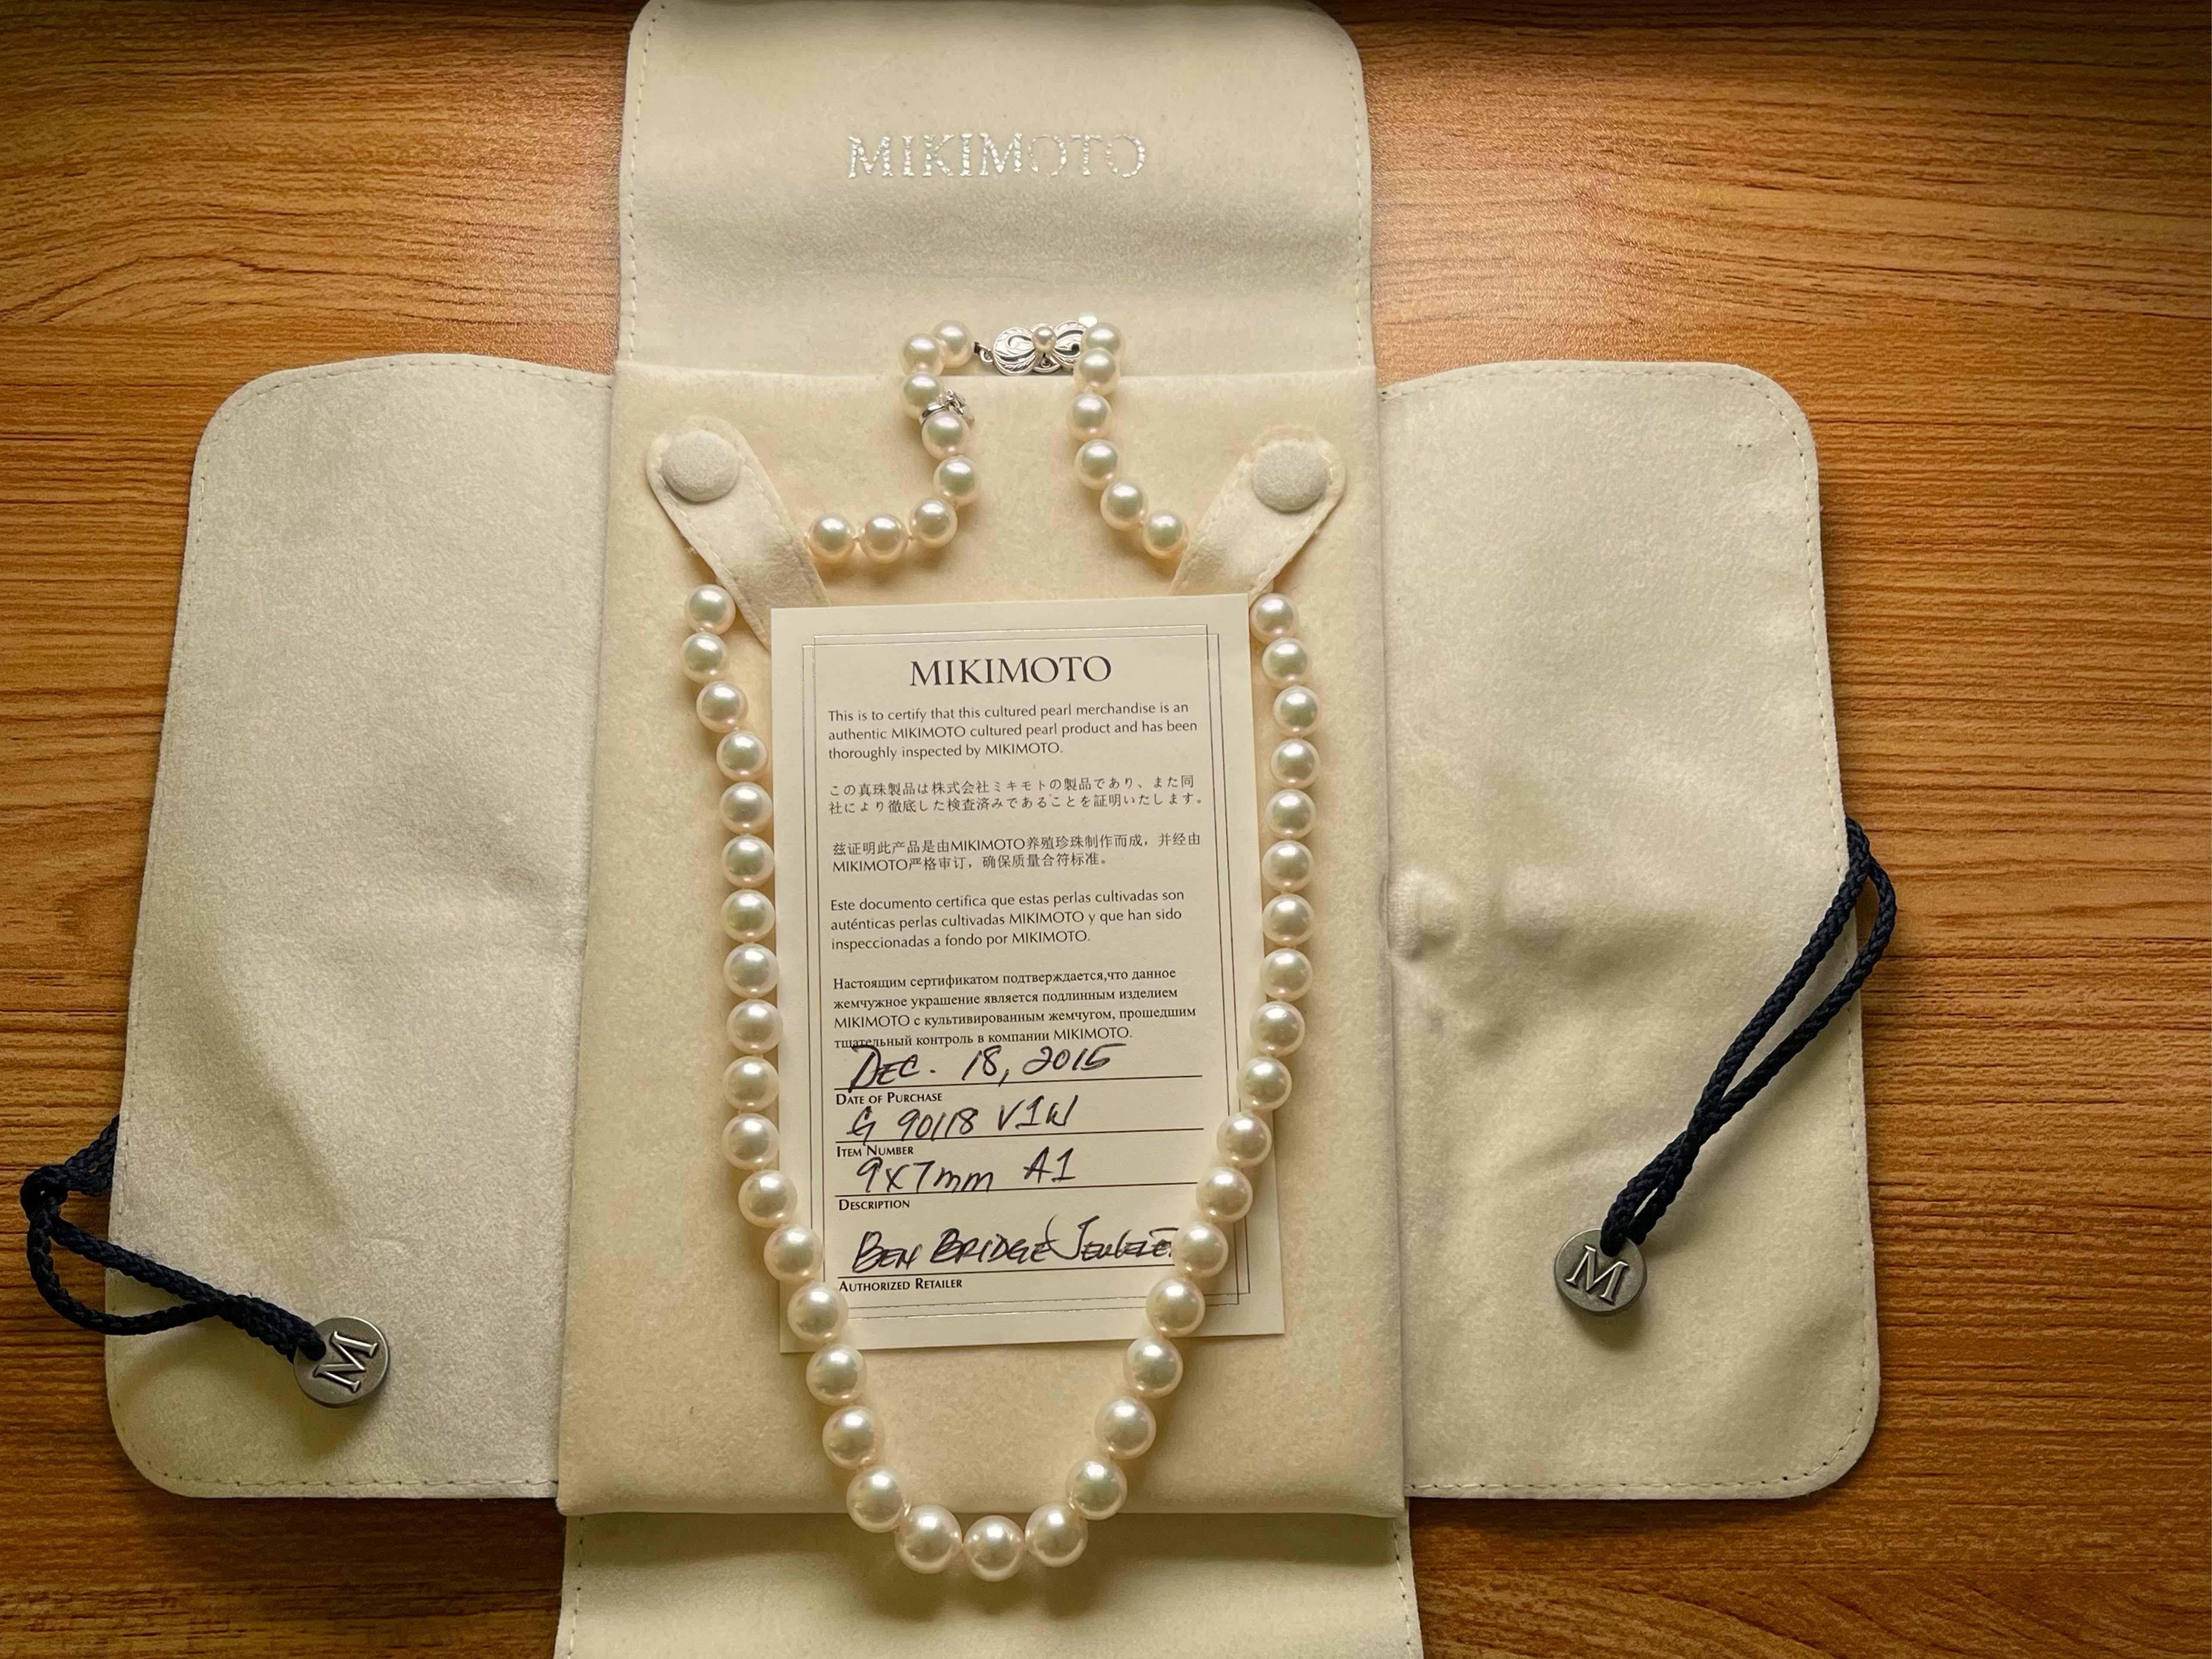 Each of Mikimoto's cultured pearl strands are a work of art born from the mystery of the sea. Creation of these strands requires incredible skill, judgment and craftsmanship. The journey begins with a rigorous selection process, culling the very